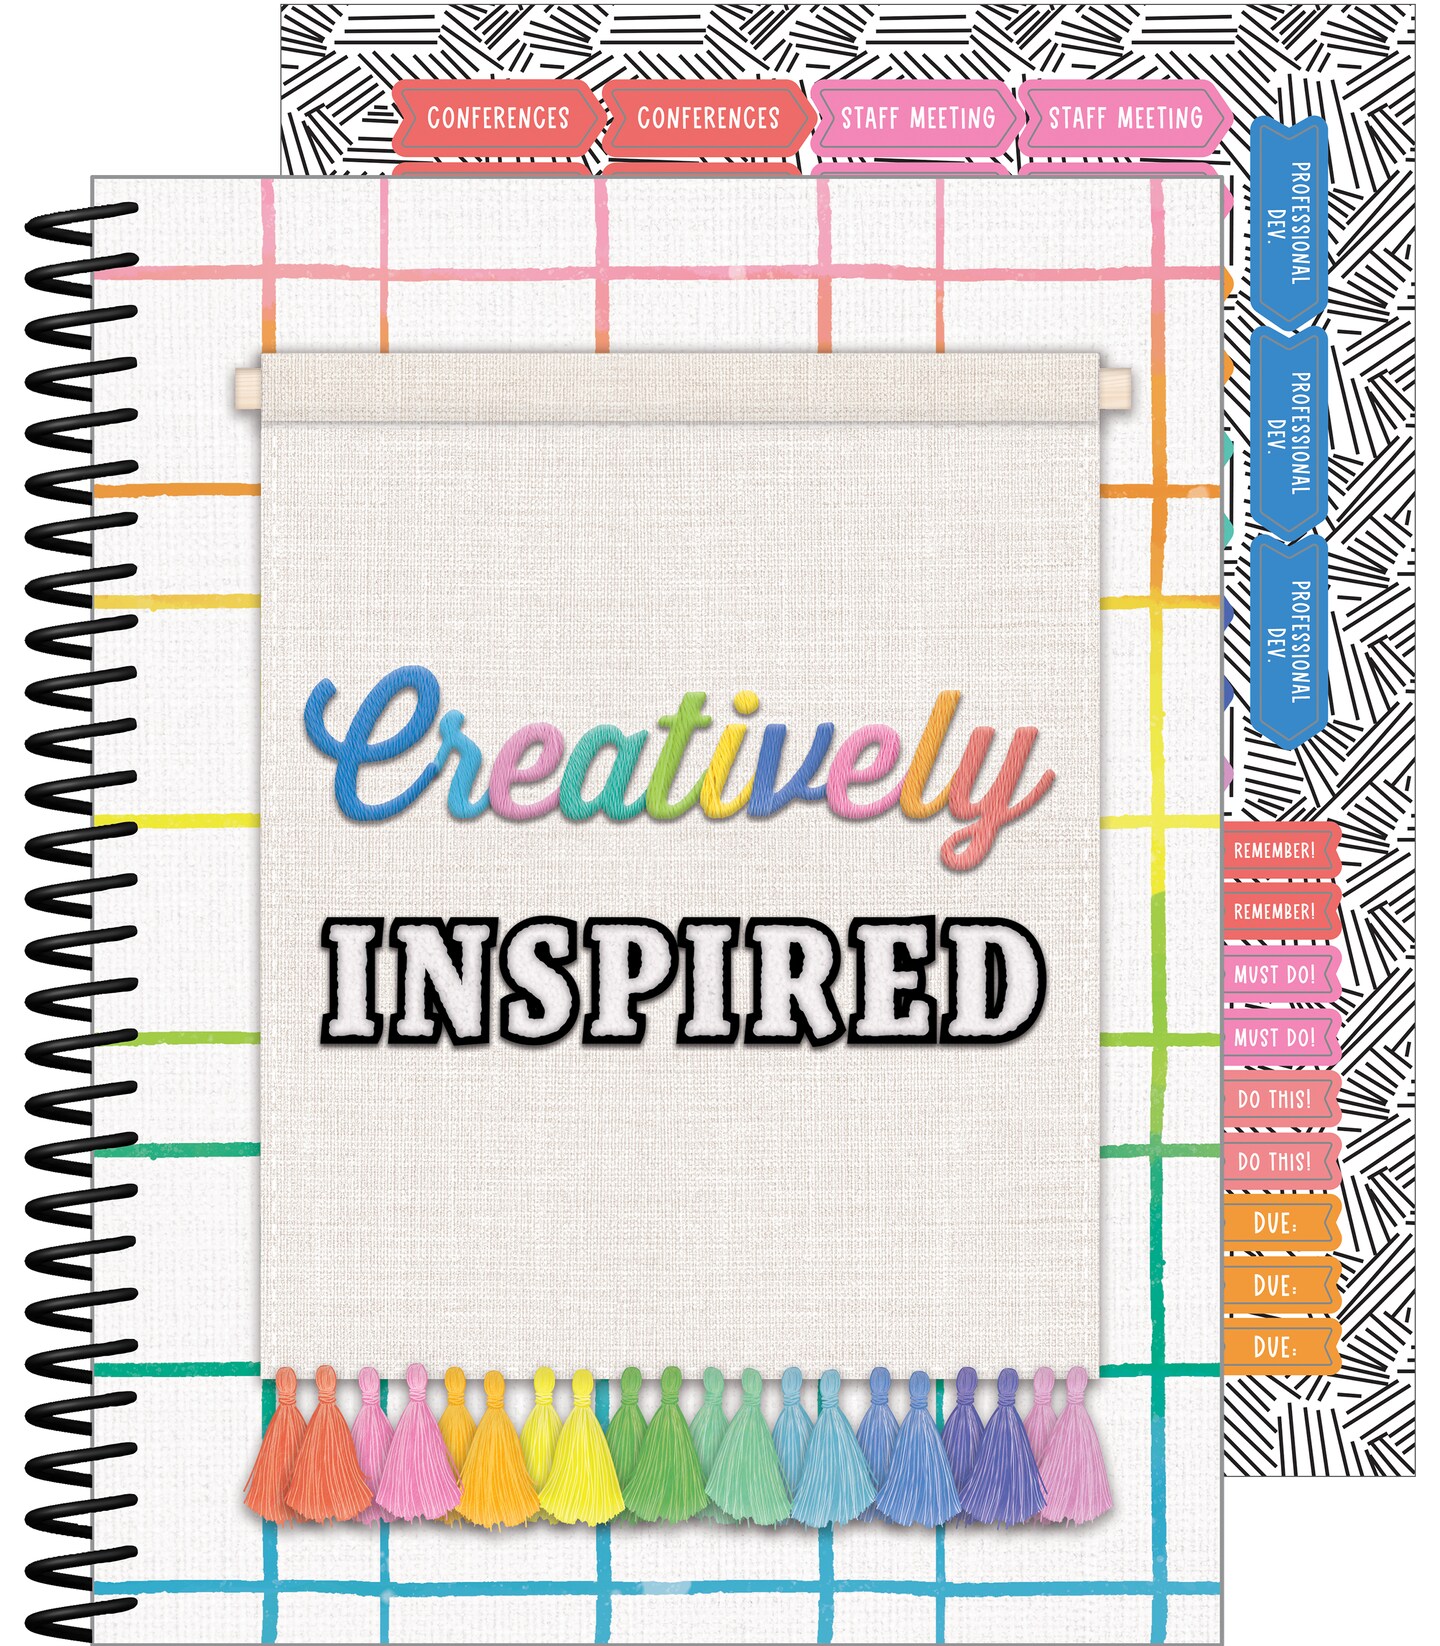 Carson Dellosa Creatively Inspired Teacher Planner, 8&#x22; x 11&#x22; Spiral Bound With Planner Stickers, Undated Daily Planner, Colorful Weekly Planner &#x26; Monthly Planner, Classroom Organization